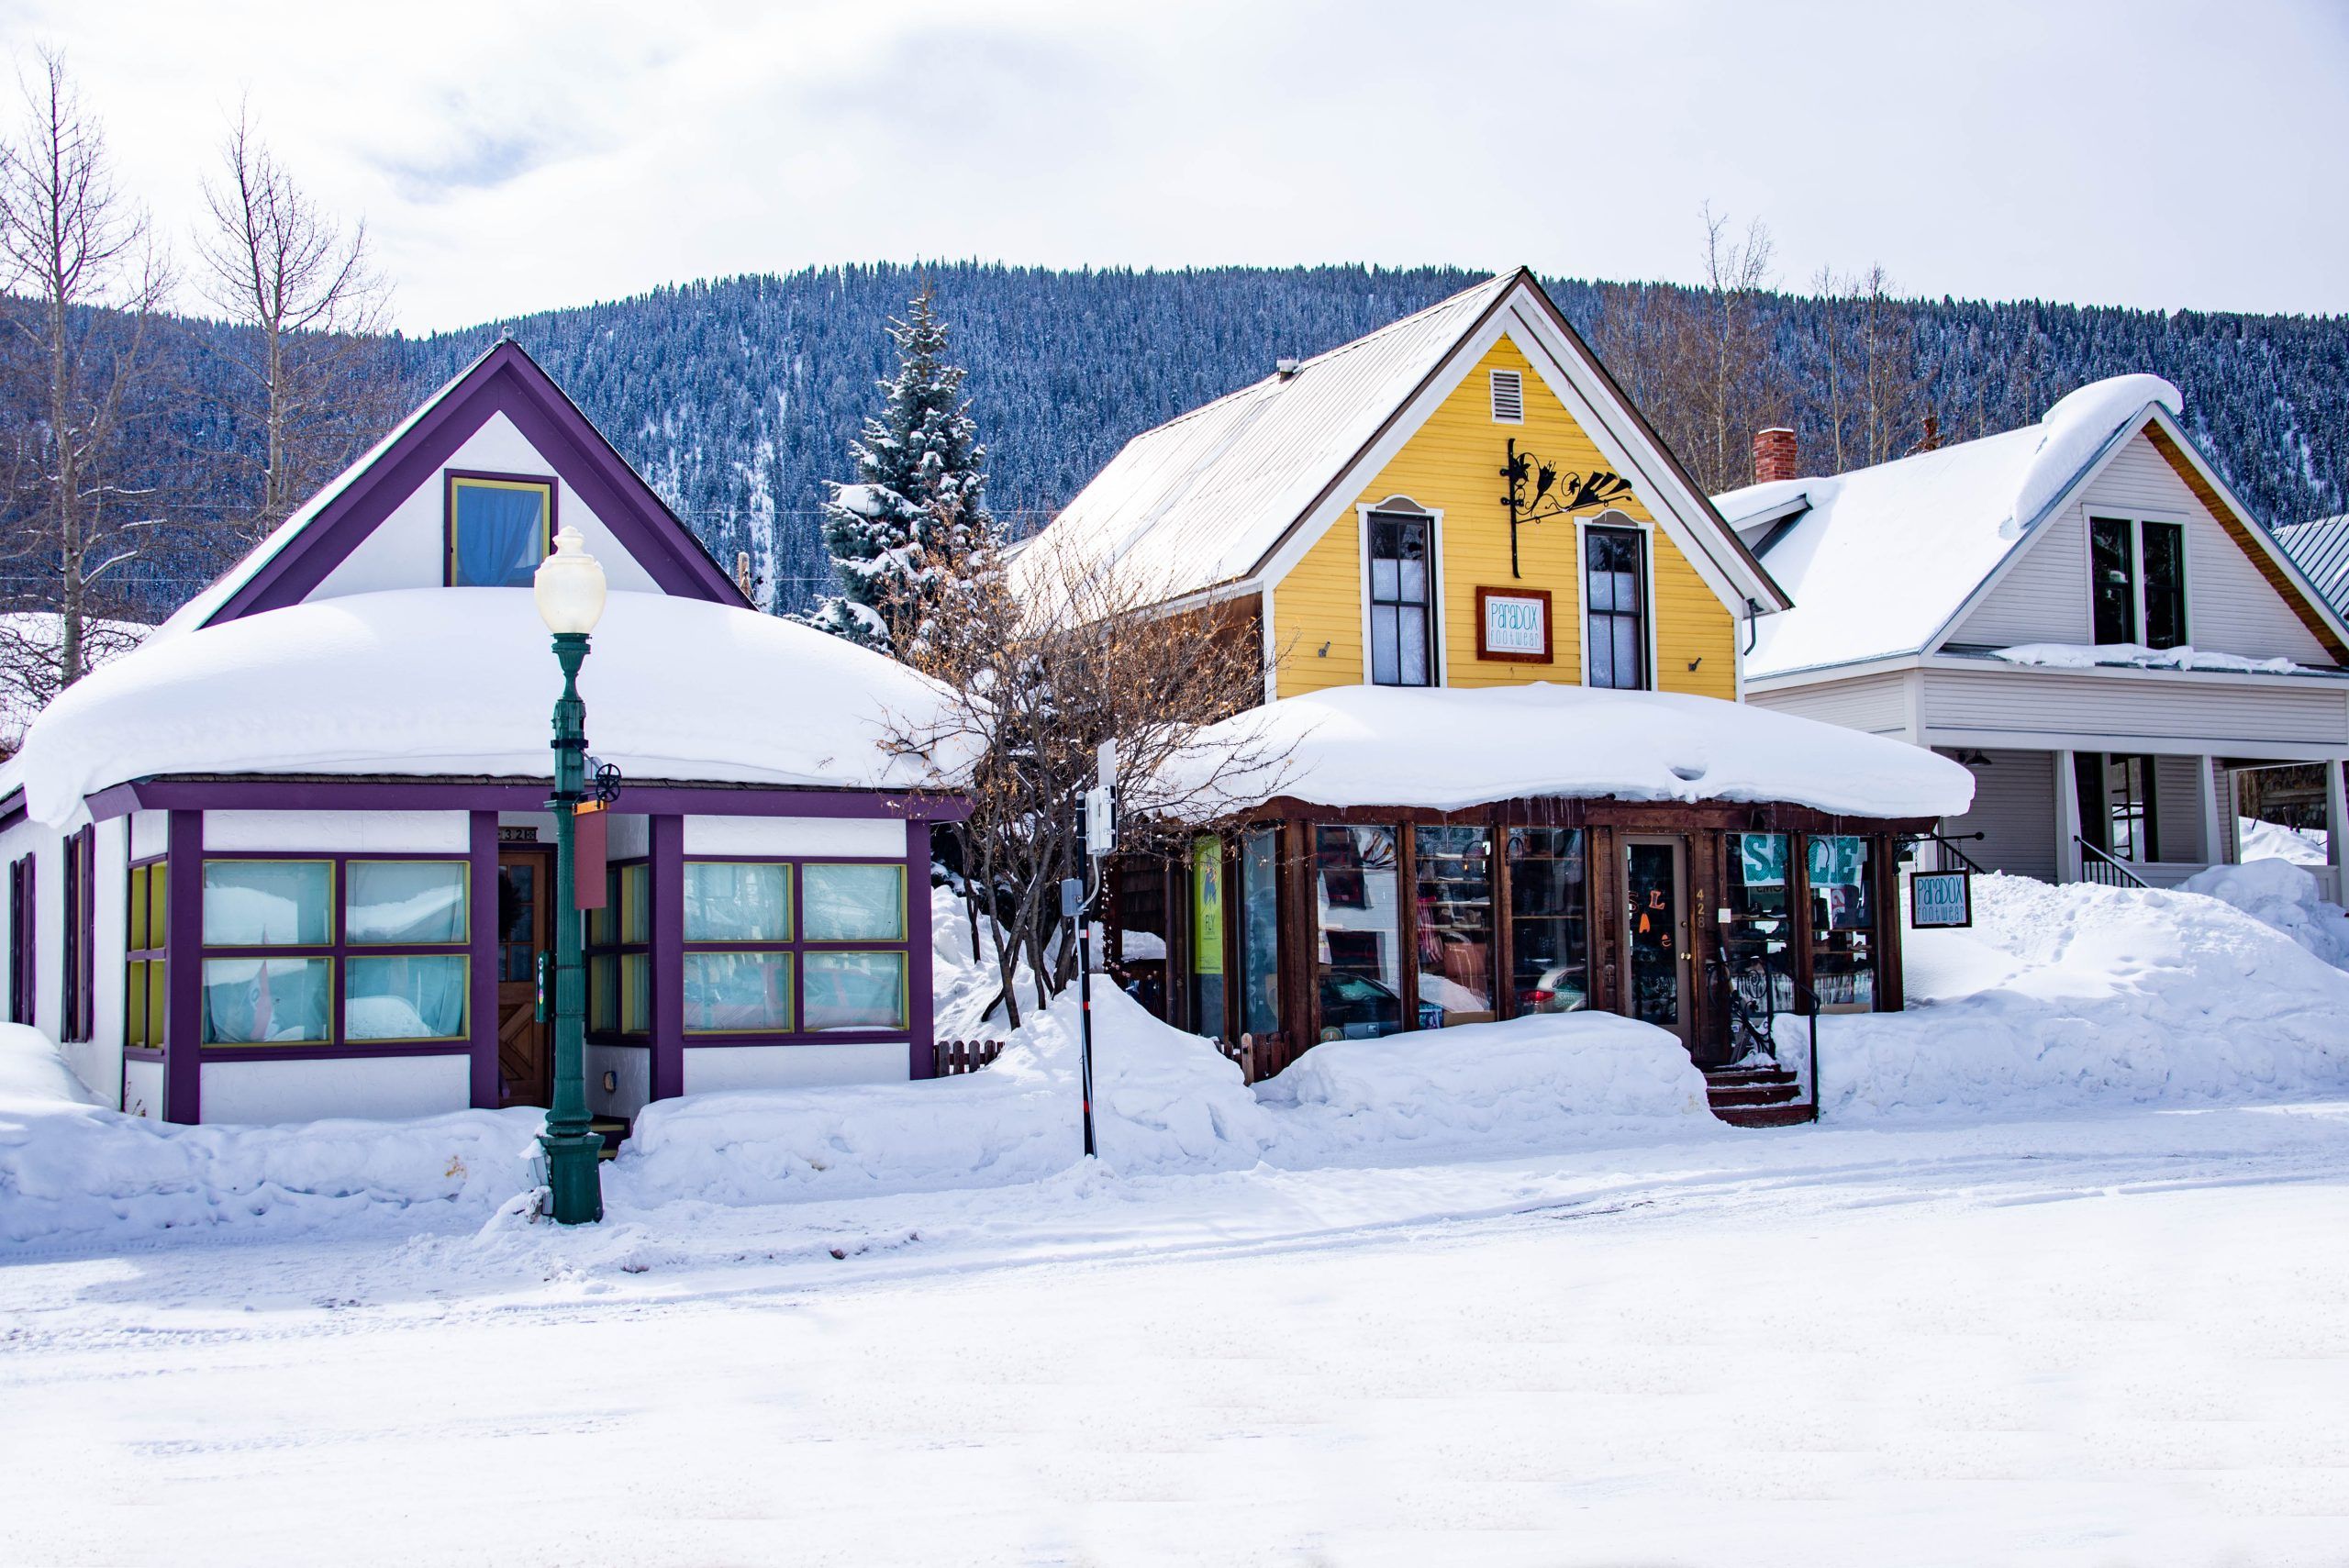 A row of Victorian-era homes with snow piled on the eaves.